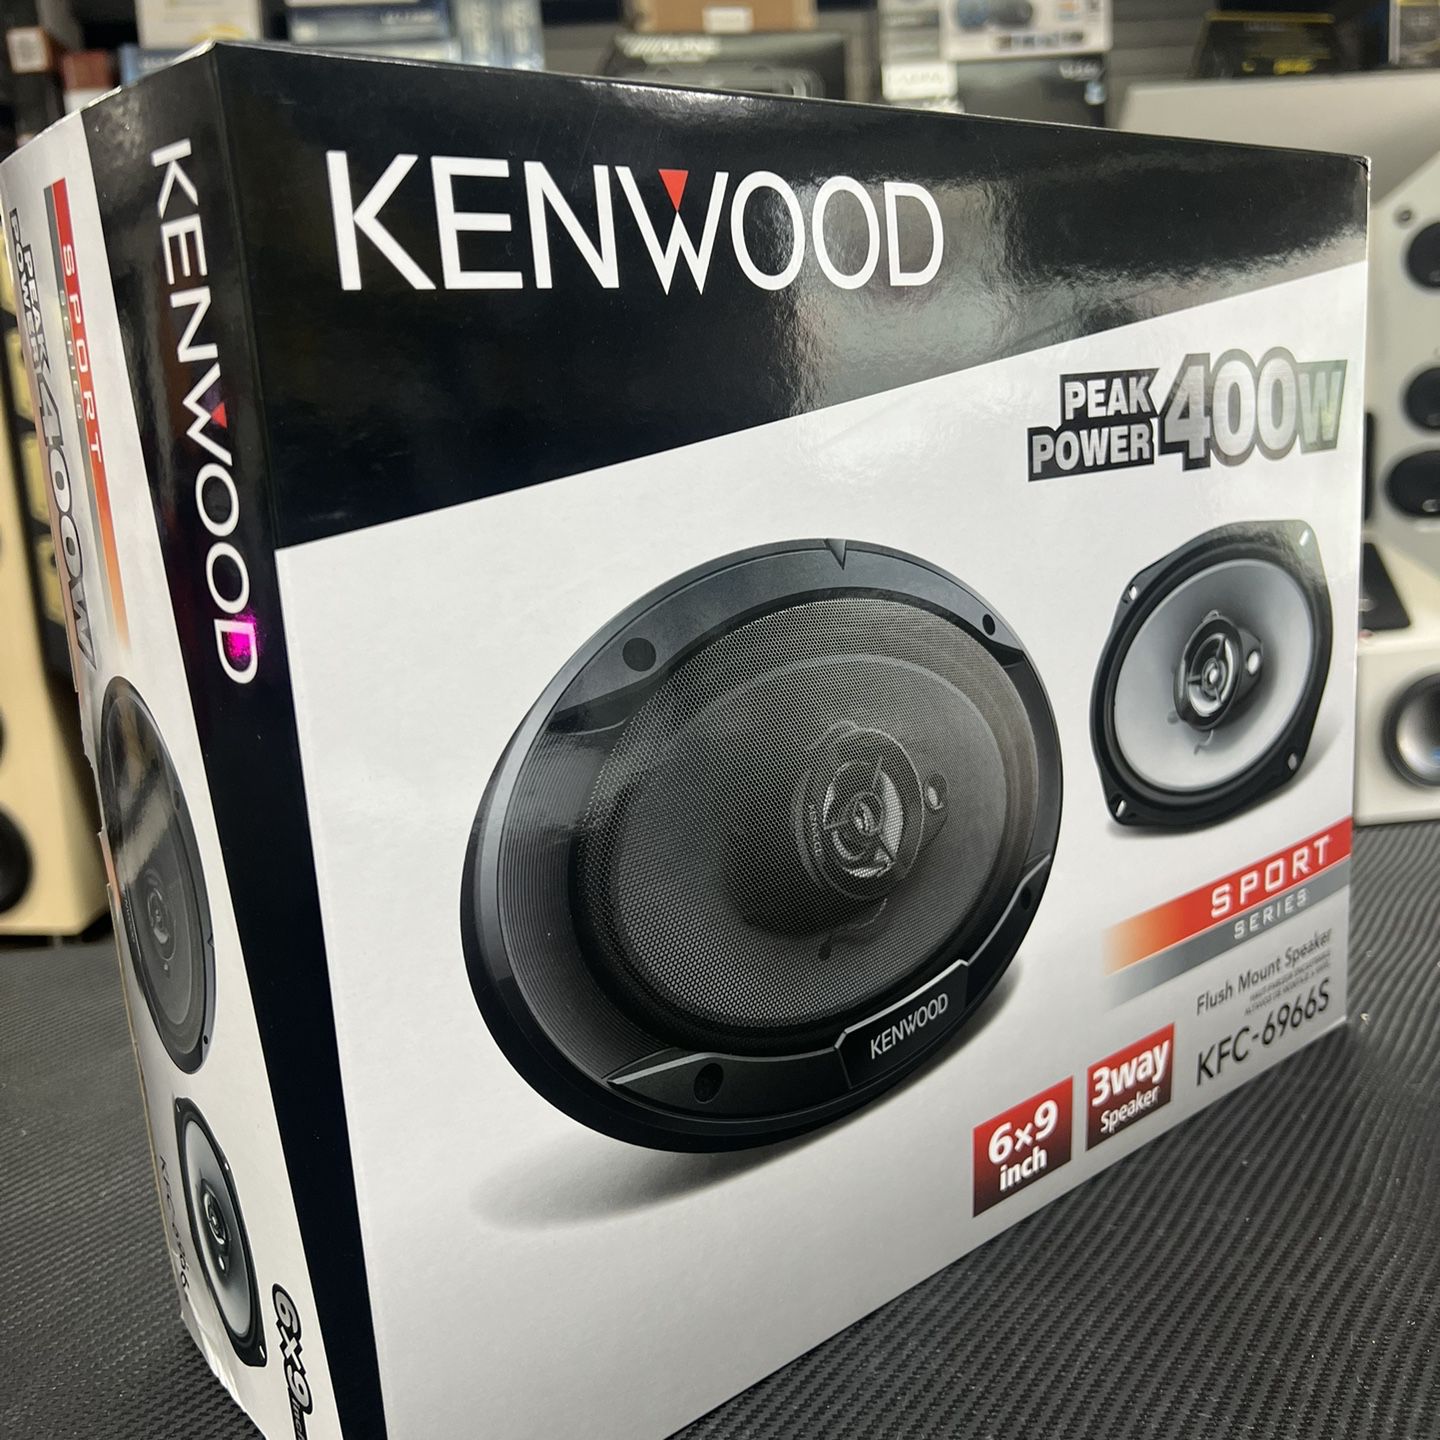 Kenwood 6x9 Speakers On Sale For $27 Only 